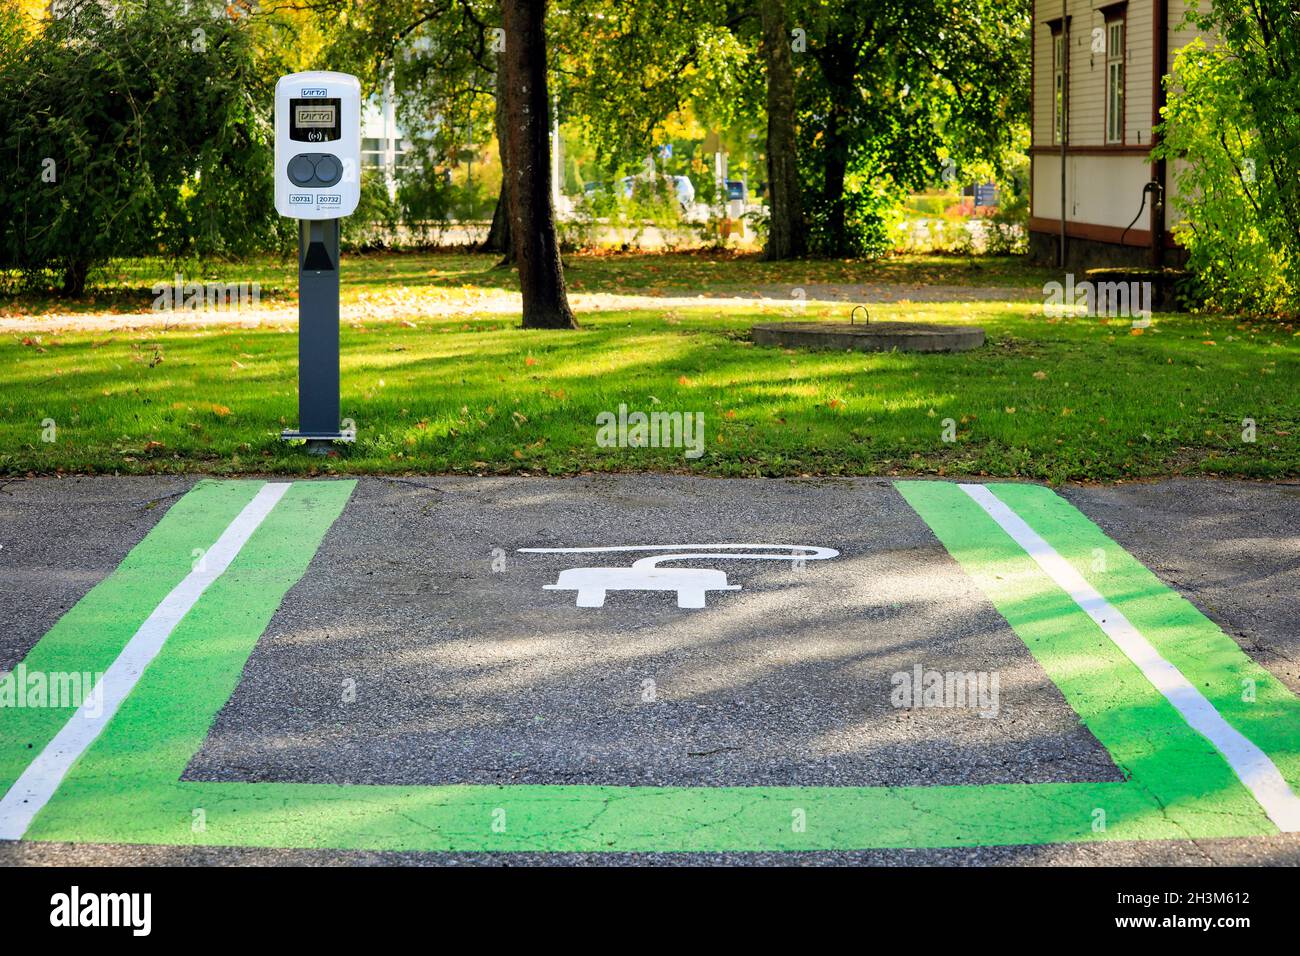 Virta Ltd ev charging point. Virta’s charging network is one of the widest in Europe, working in over 25 countries. Salo, Finland. September 19, 2020. Stock Photo